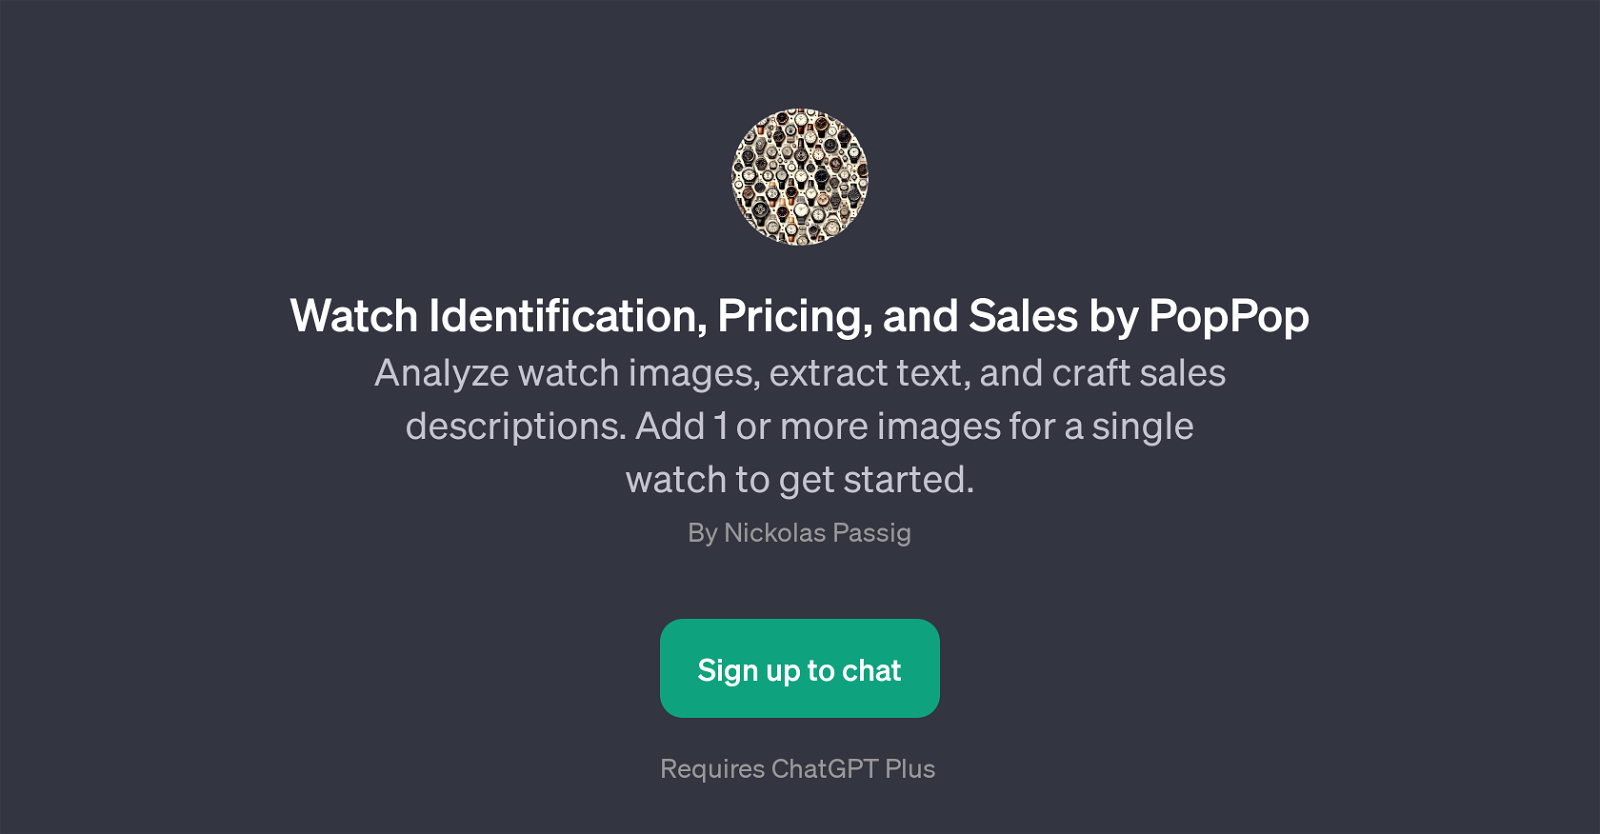 Watch Identification, Pricing, and Sales by PopPop website